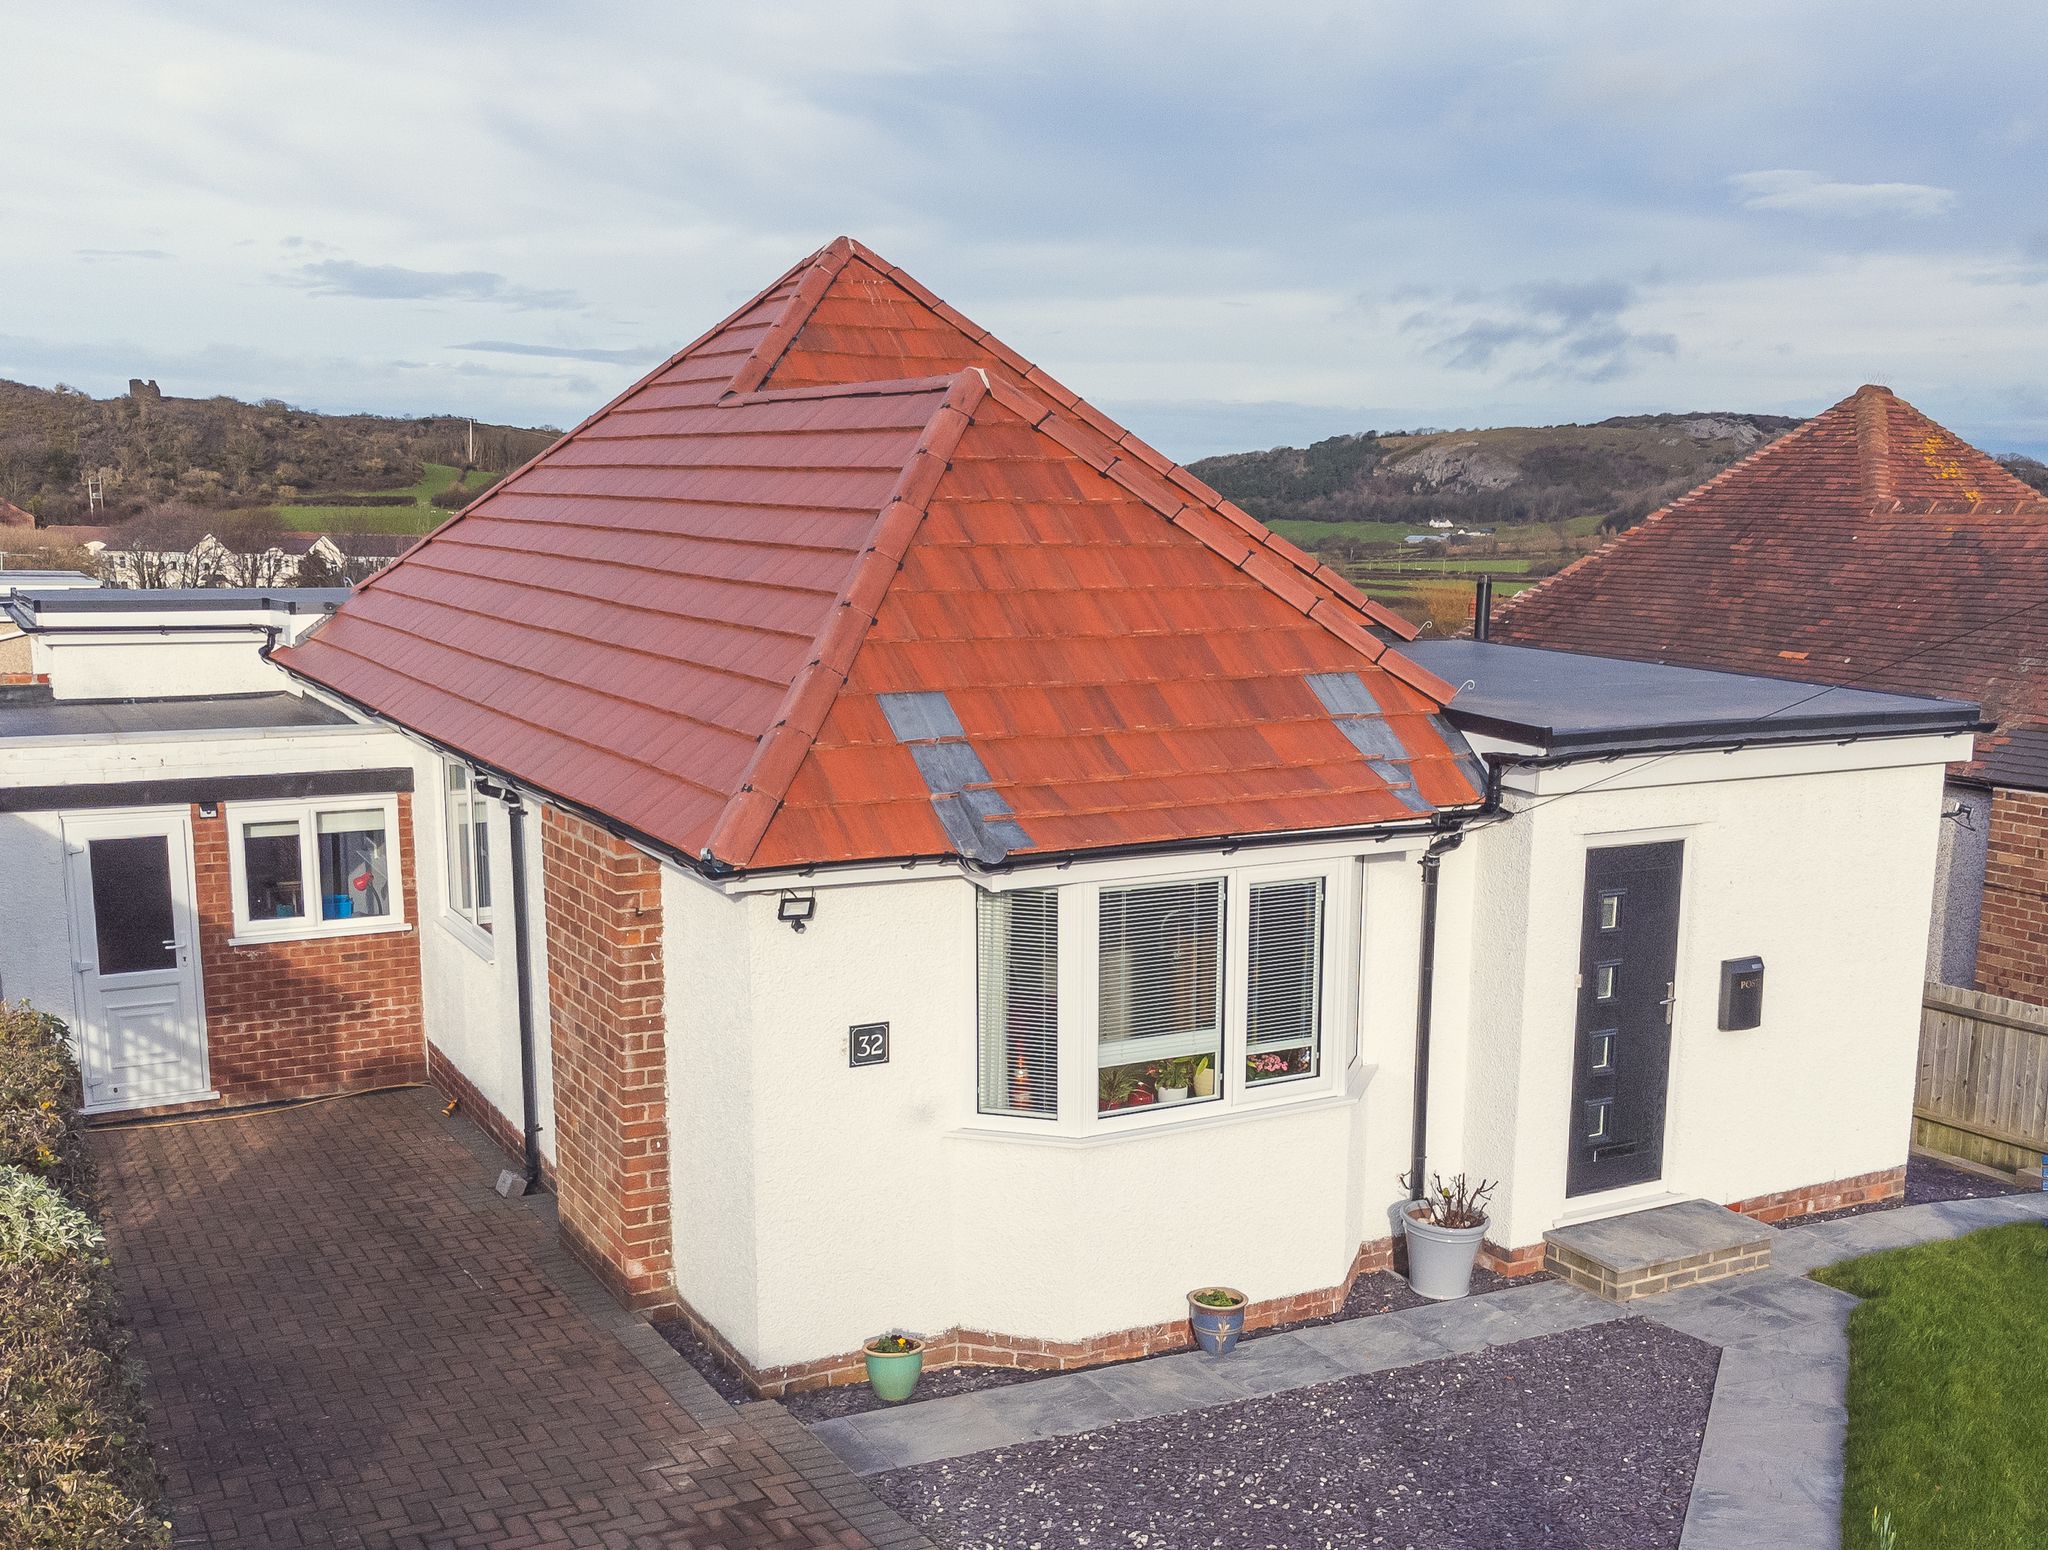 Tile Roof Contractors Cwm-Cewydd, SY20 - DD Roofing